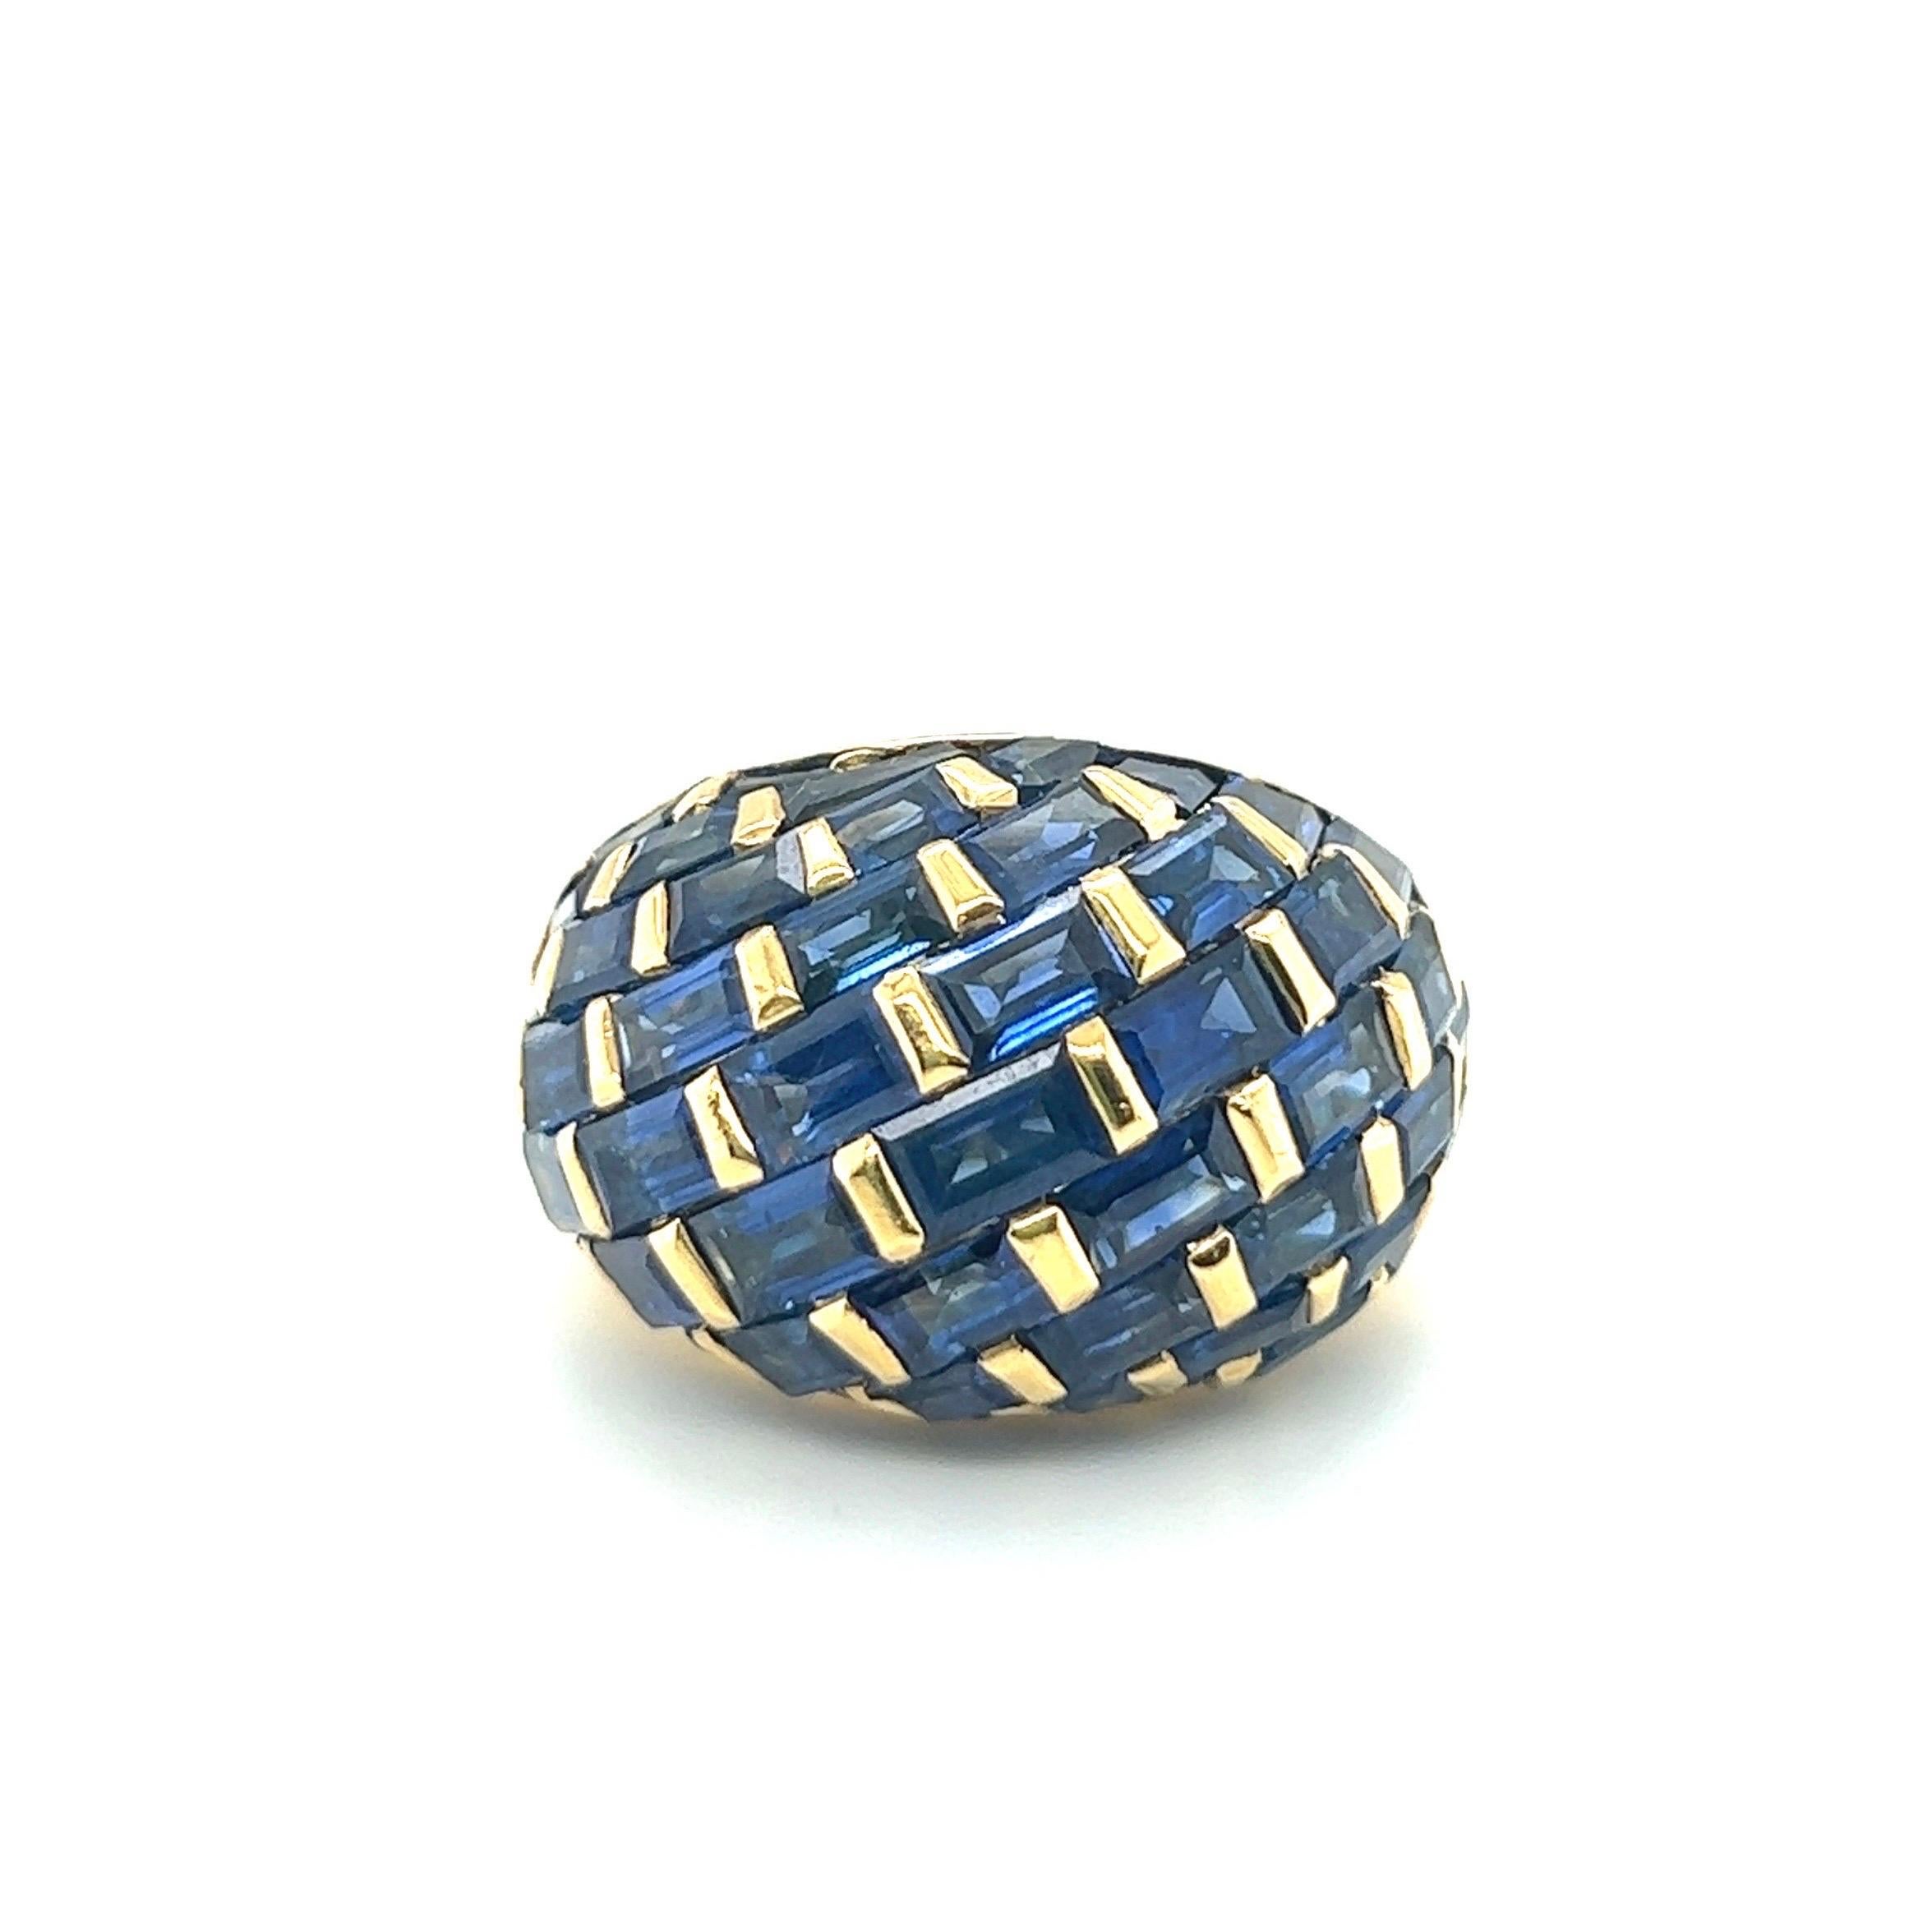 Modern 18 Karat Yellow Gold and Sapphire Cocktail Ring, circa 1970s For Sale